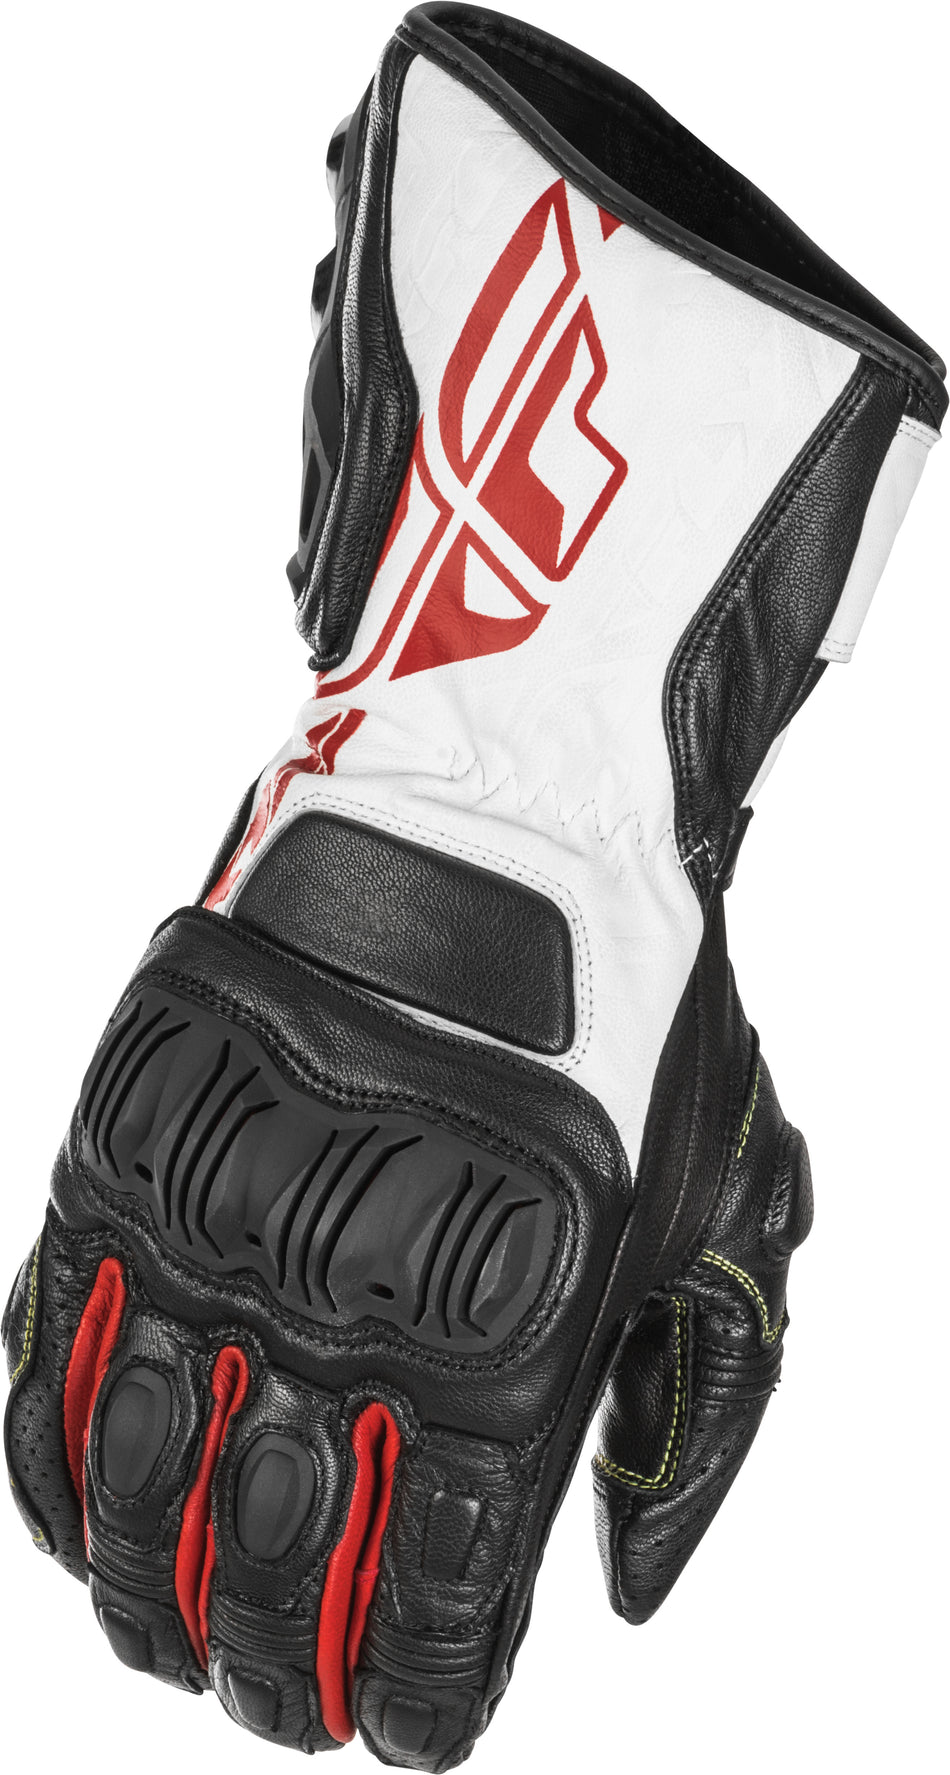 FLY RACING Fl-2 Gloves Black/White/Red Md #5884 476-2081~3